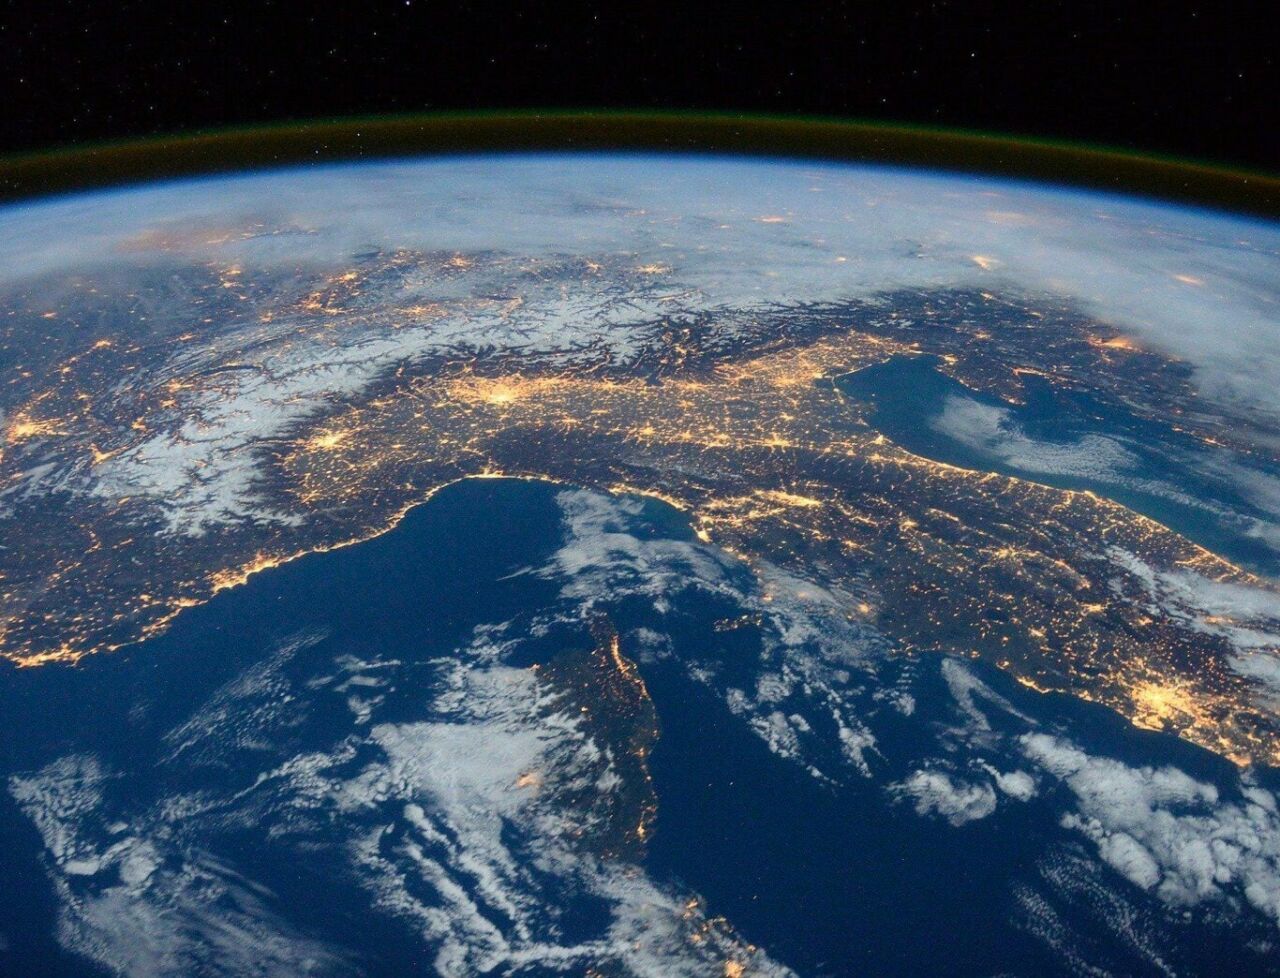 View of lights across Earth, viewed from the International Space Station.